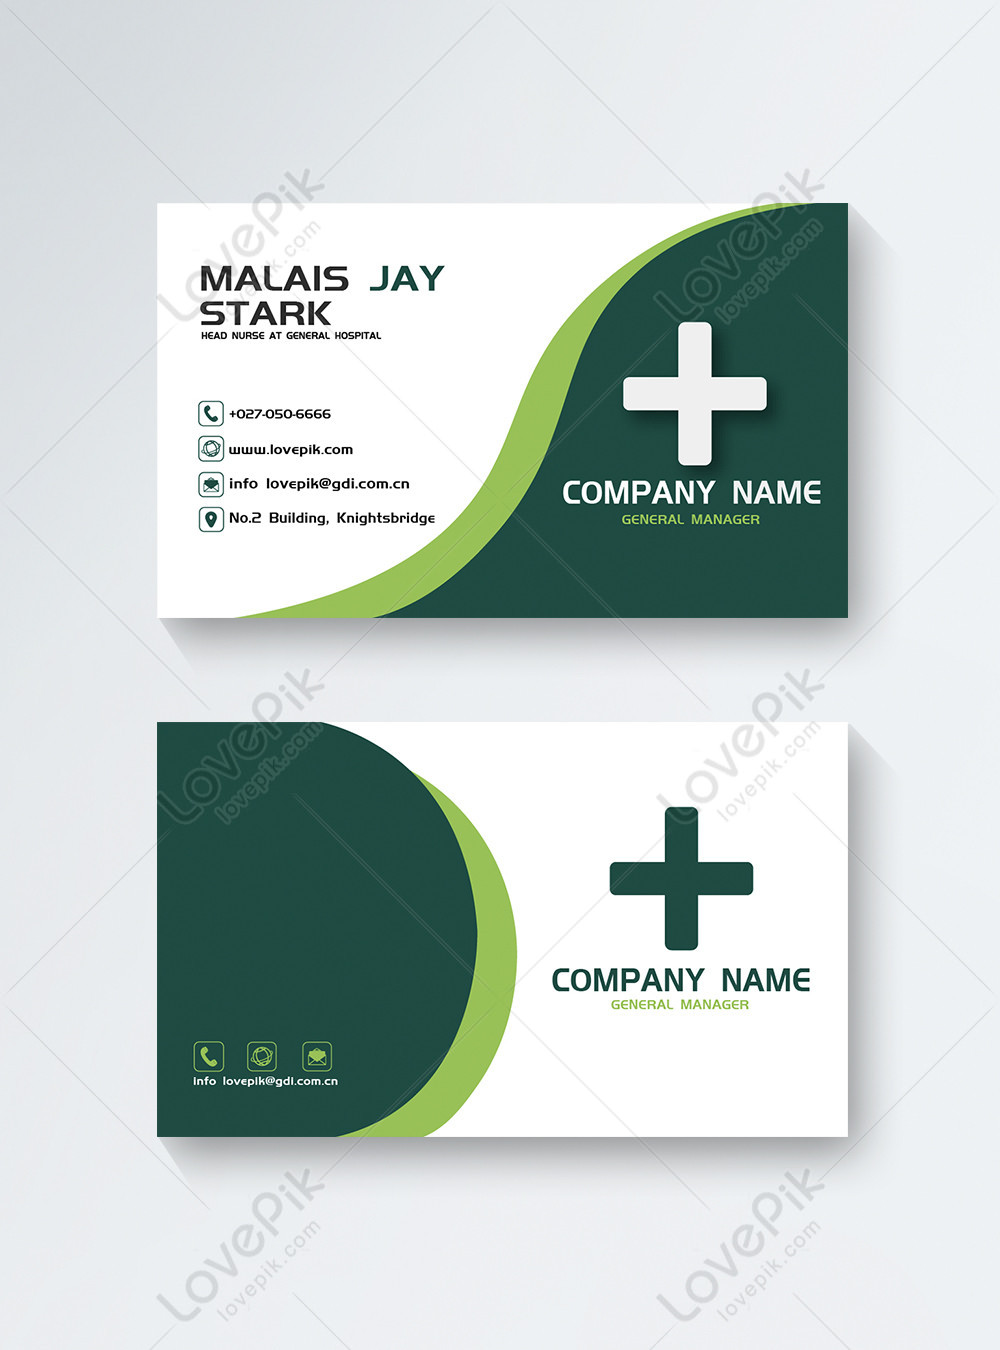 Medical business cards template image_picture free download With Regard To Medical Business Cards Templates Free